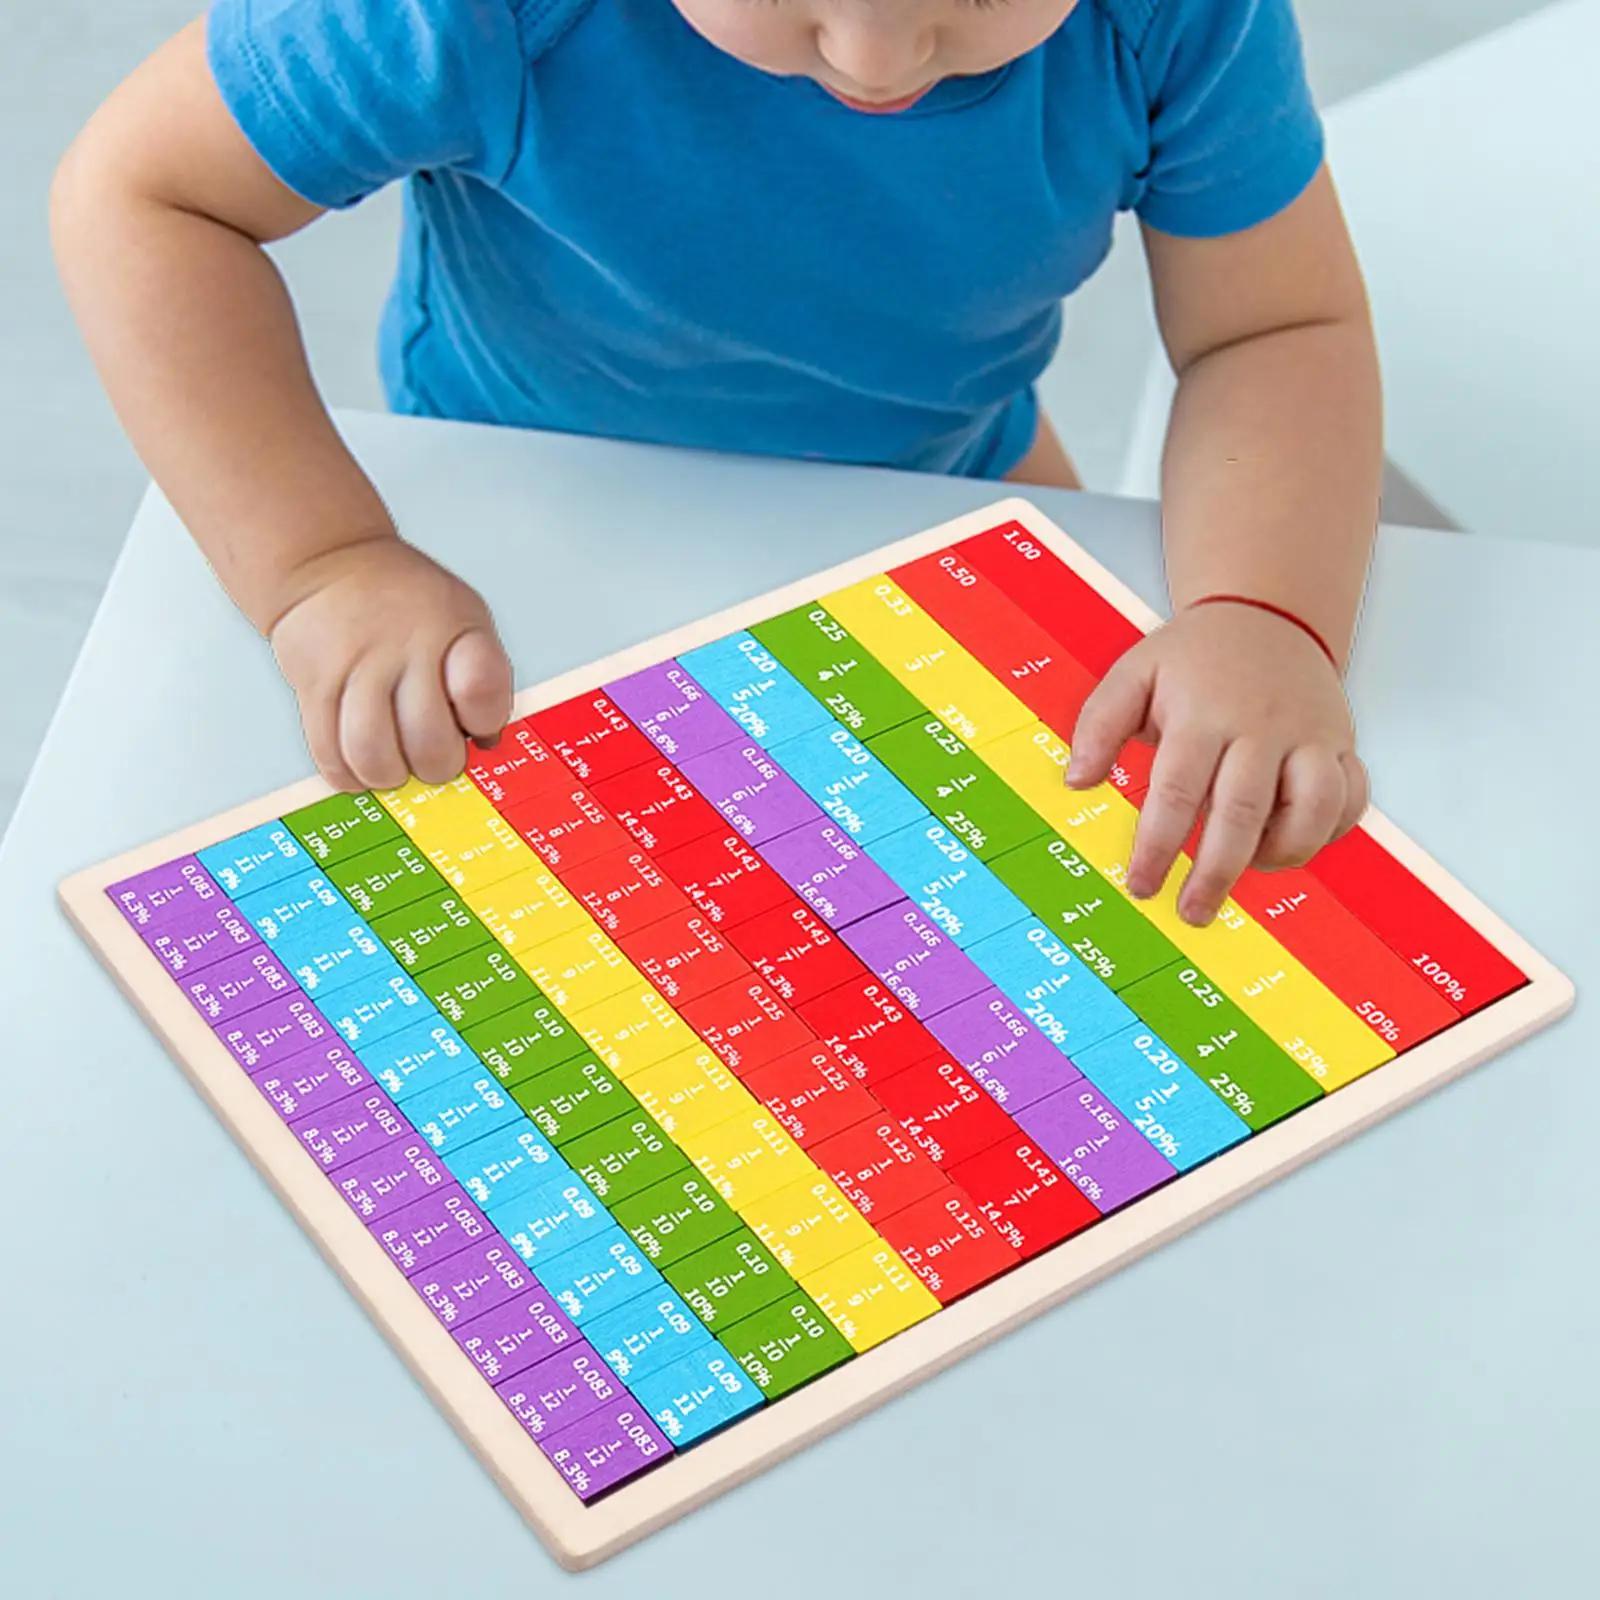 Fraction Tiles Education Toy Math Learning Tiles Math Skills Teach Fractions, Decimals and Percent Equivalents for Classroom